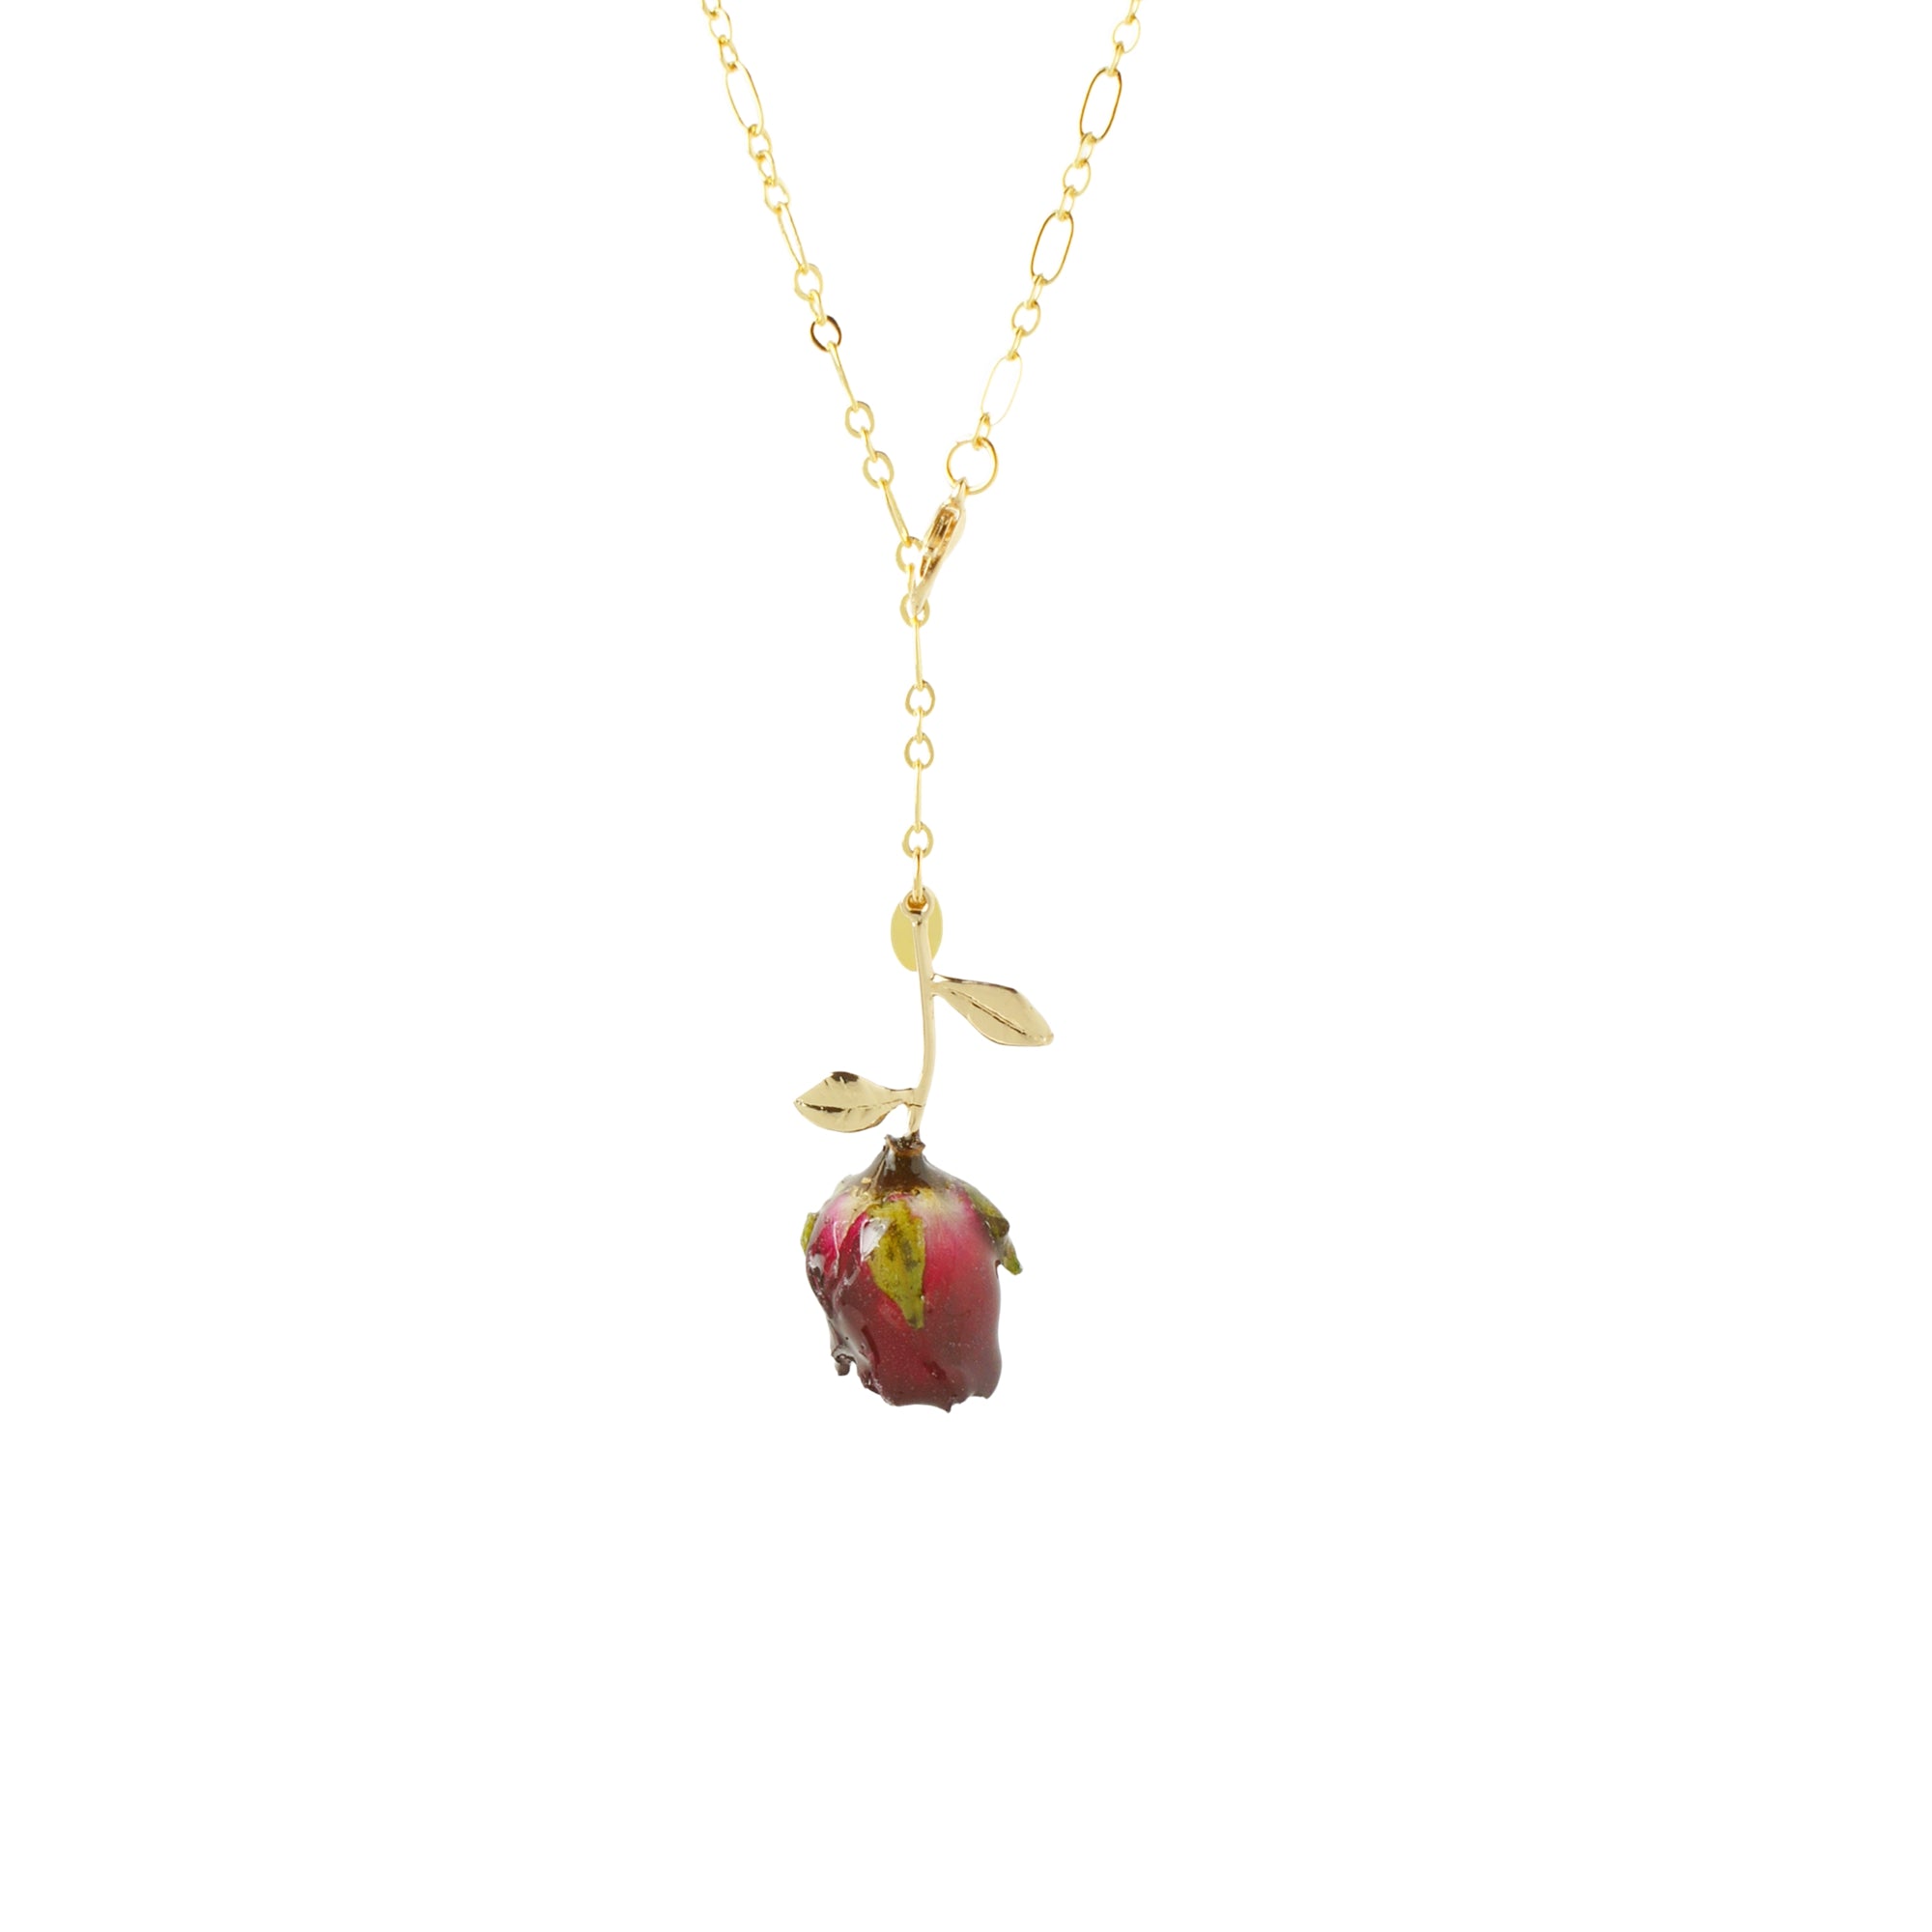 *REAL FLOWER* Grande Amore Rosebud with Stem Chain Necklace